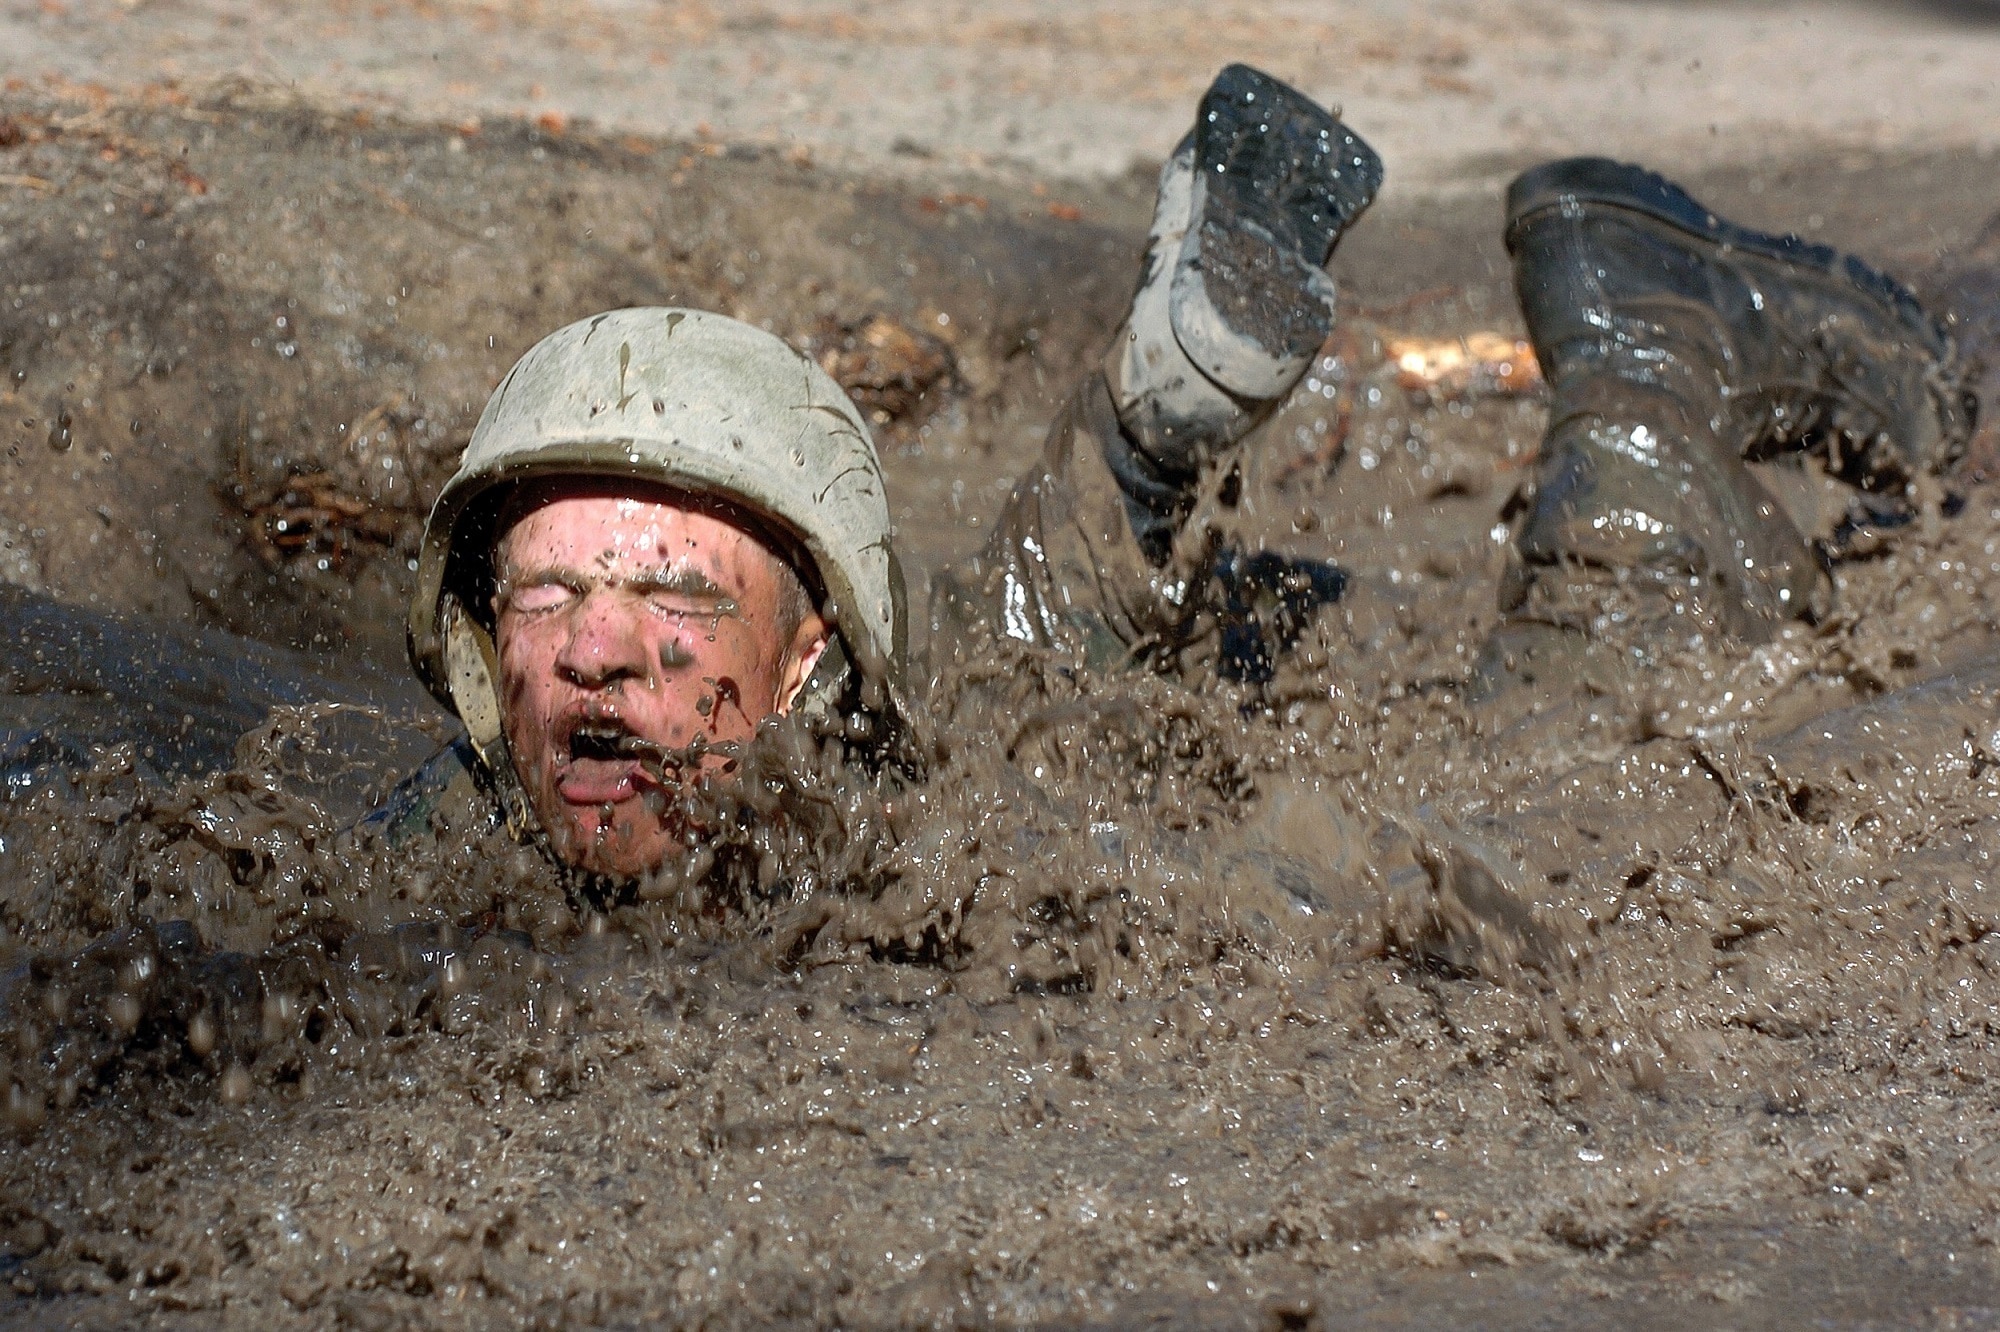 man with helmet dive in the mud during day time